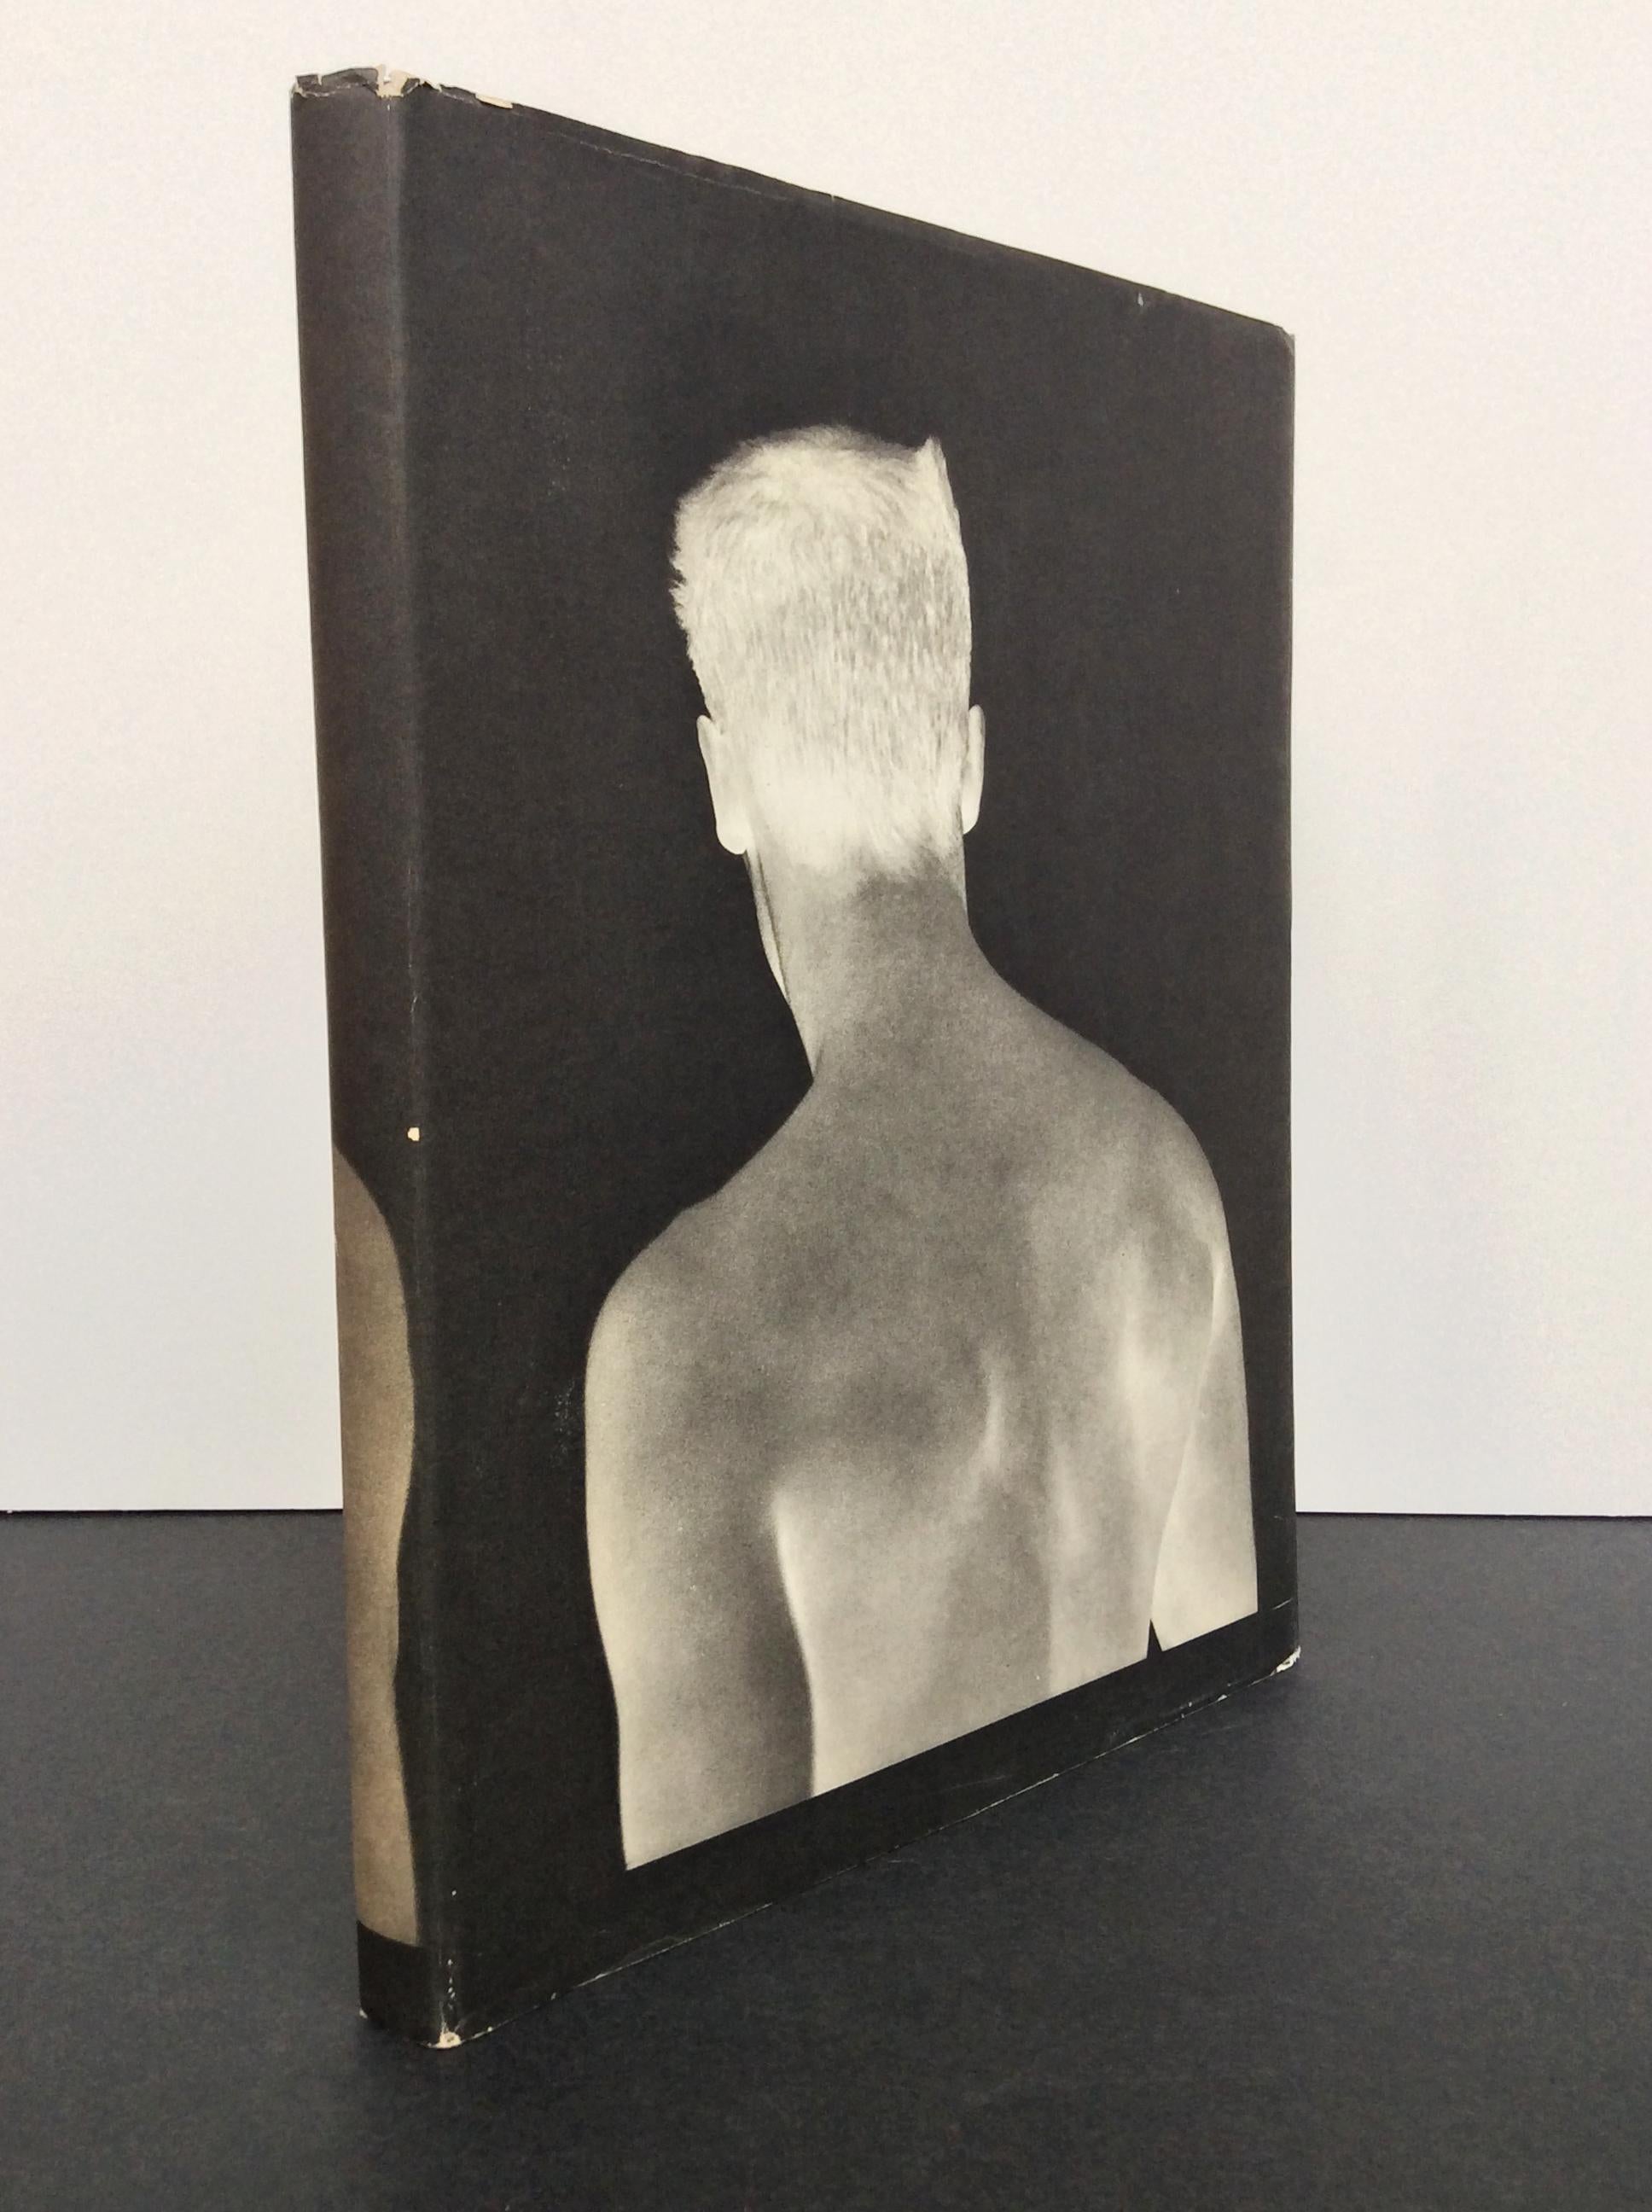 A beautifully conceptualized book of portraits by the photographer Bruce Webber. This hardbound book was published by Twelvetrees Press in 1983. The cover is elegantly wrapped in blue linen and protected by a dust jacket. Webber's photographs are